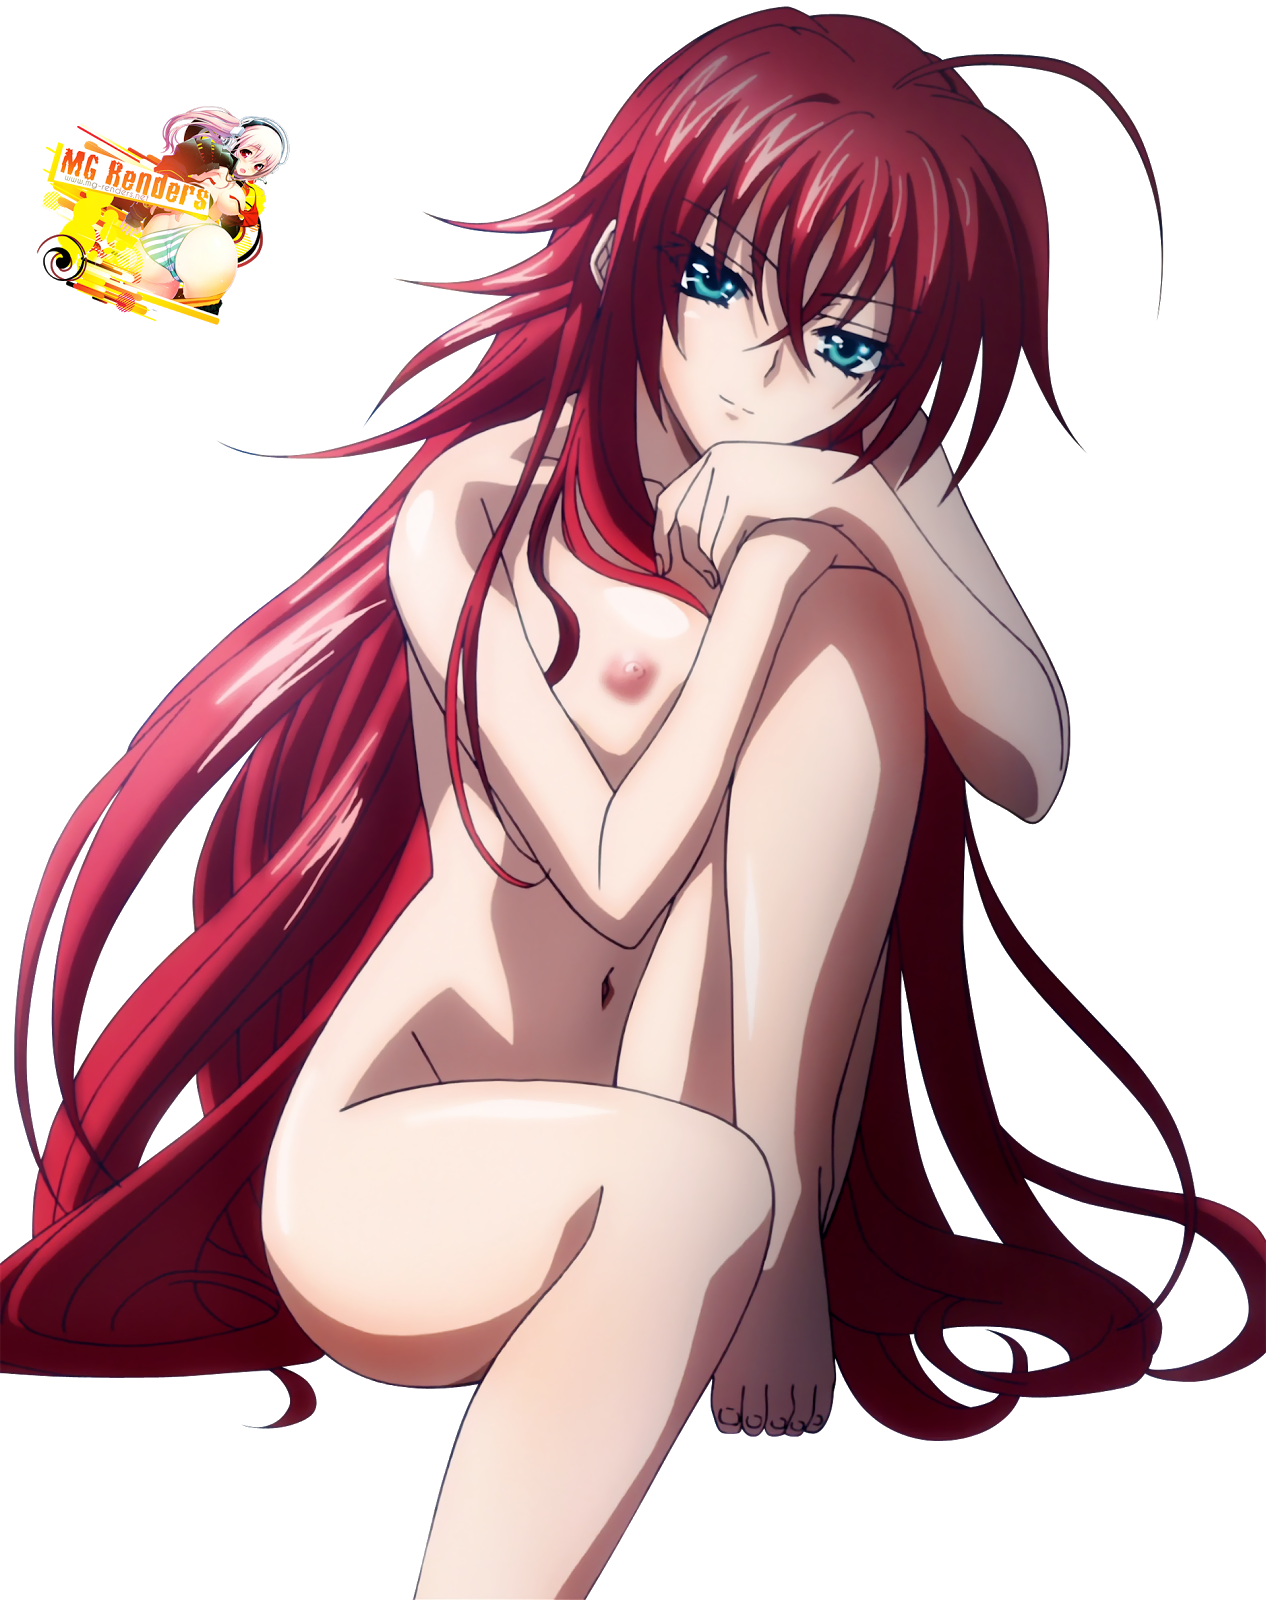 High School DxD - Rias Gremory Render 49 Ecchi Hentai Naked Nipples.